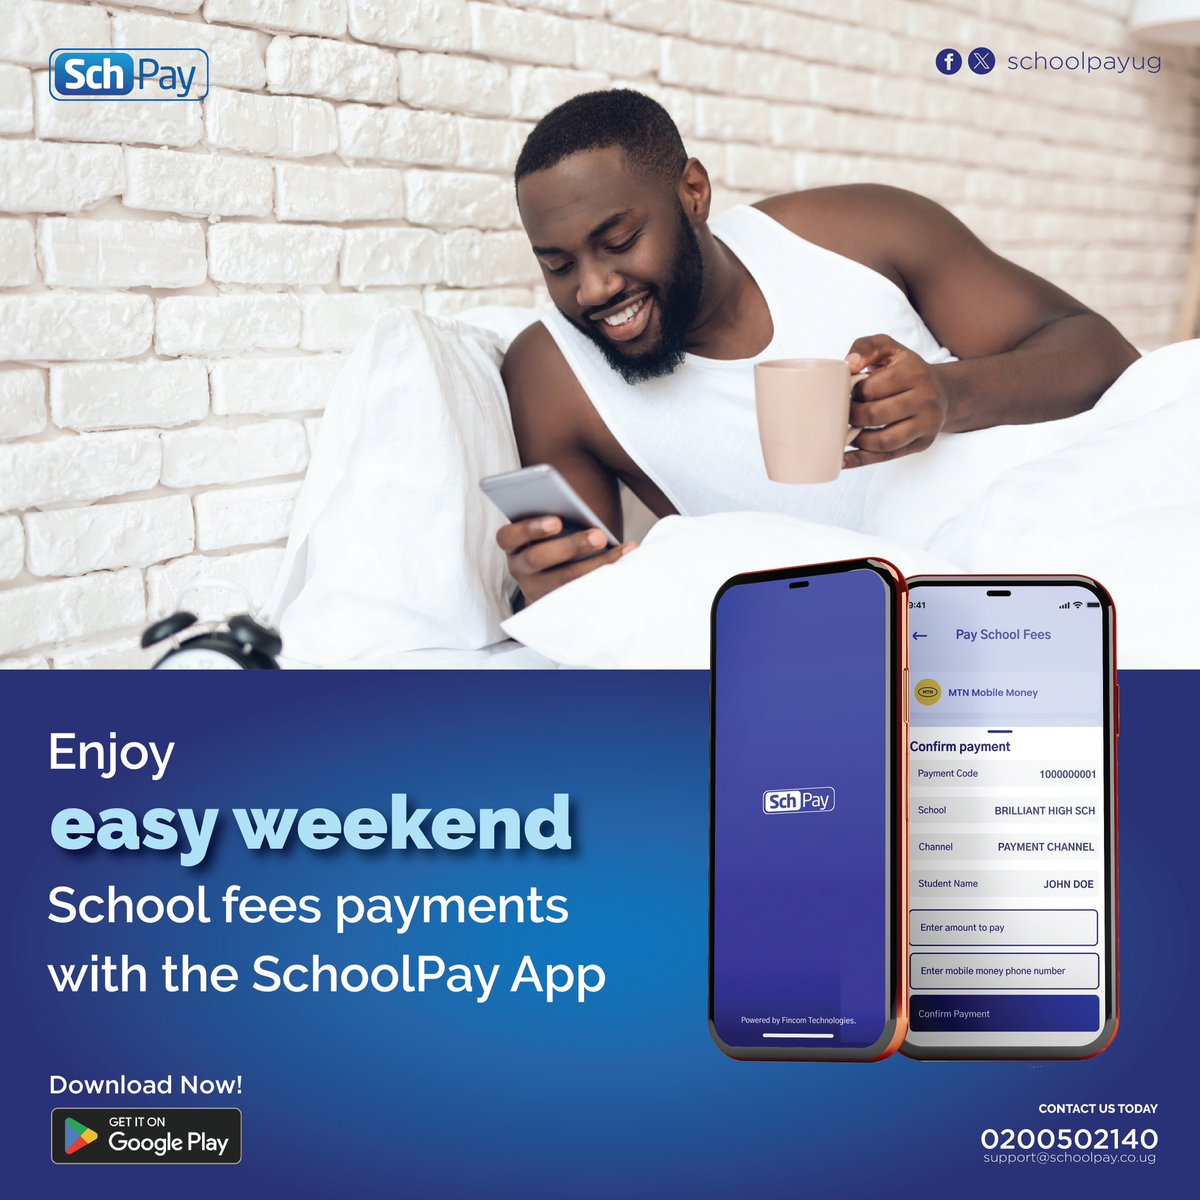 Do both at your fingertips. make your child’s SchoolFees balance payments and still enjoy your weekend using the SchoolPay App. #DownloadTheApp. #SchoolPay